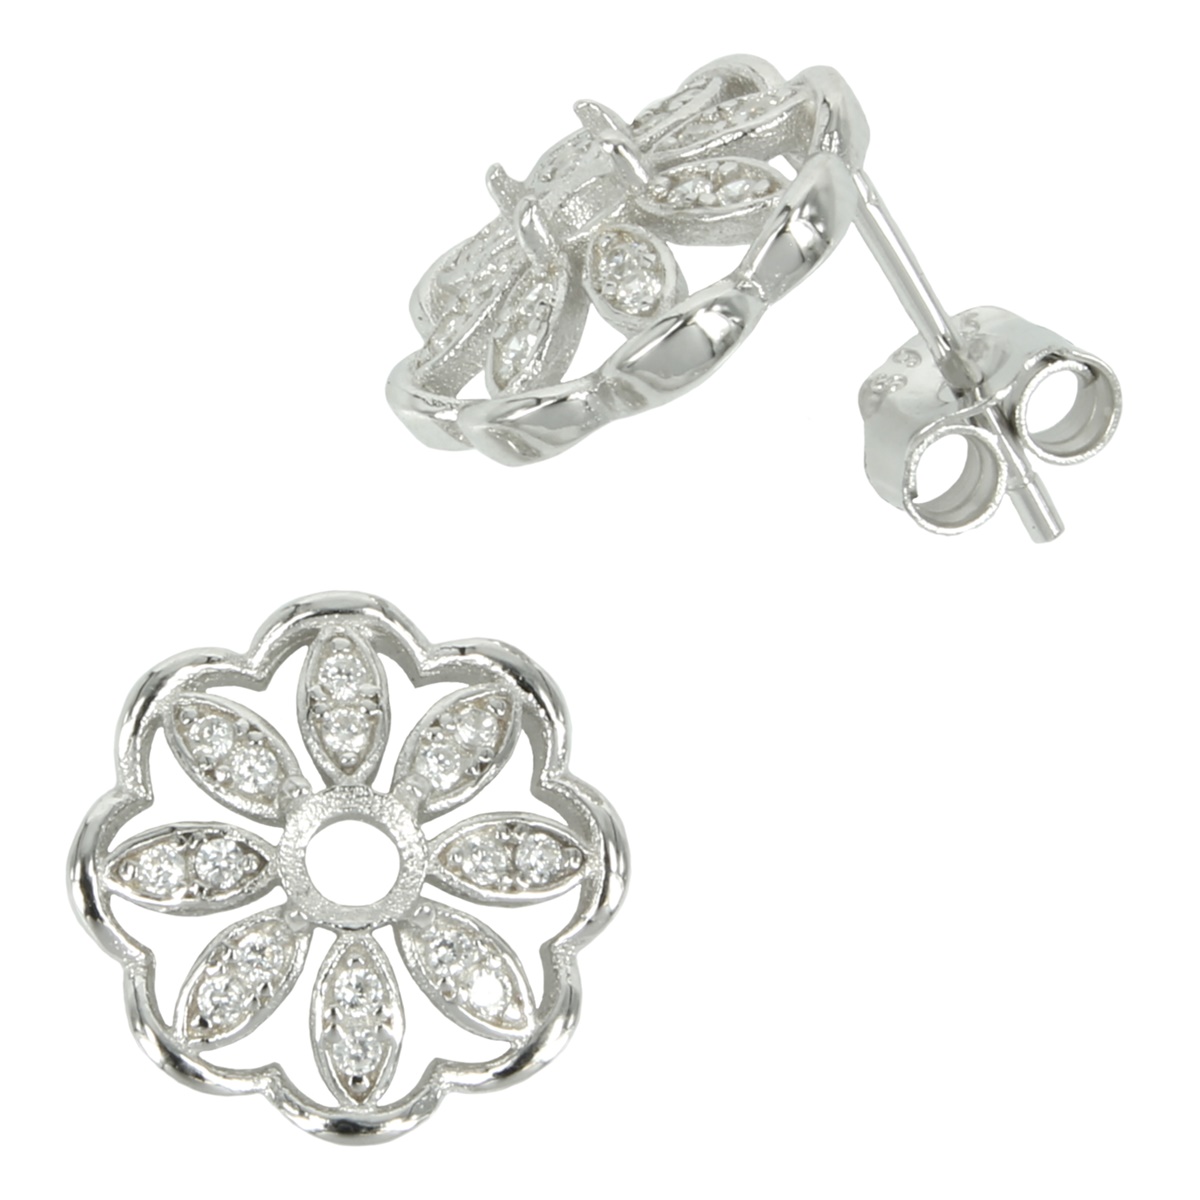 Daisy CZ Border Stud Earrings with Round Prong Mounting in Sterling Silver for 3mm Stones 